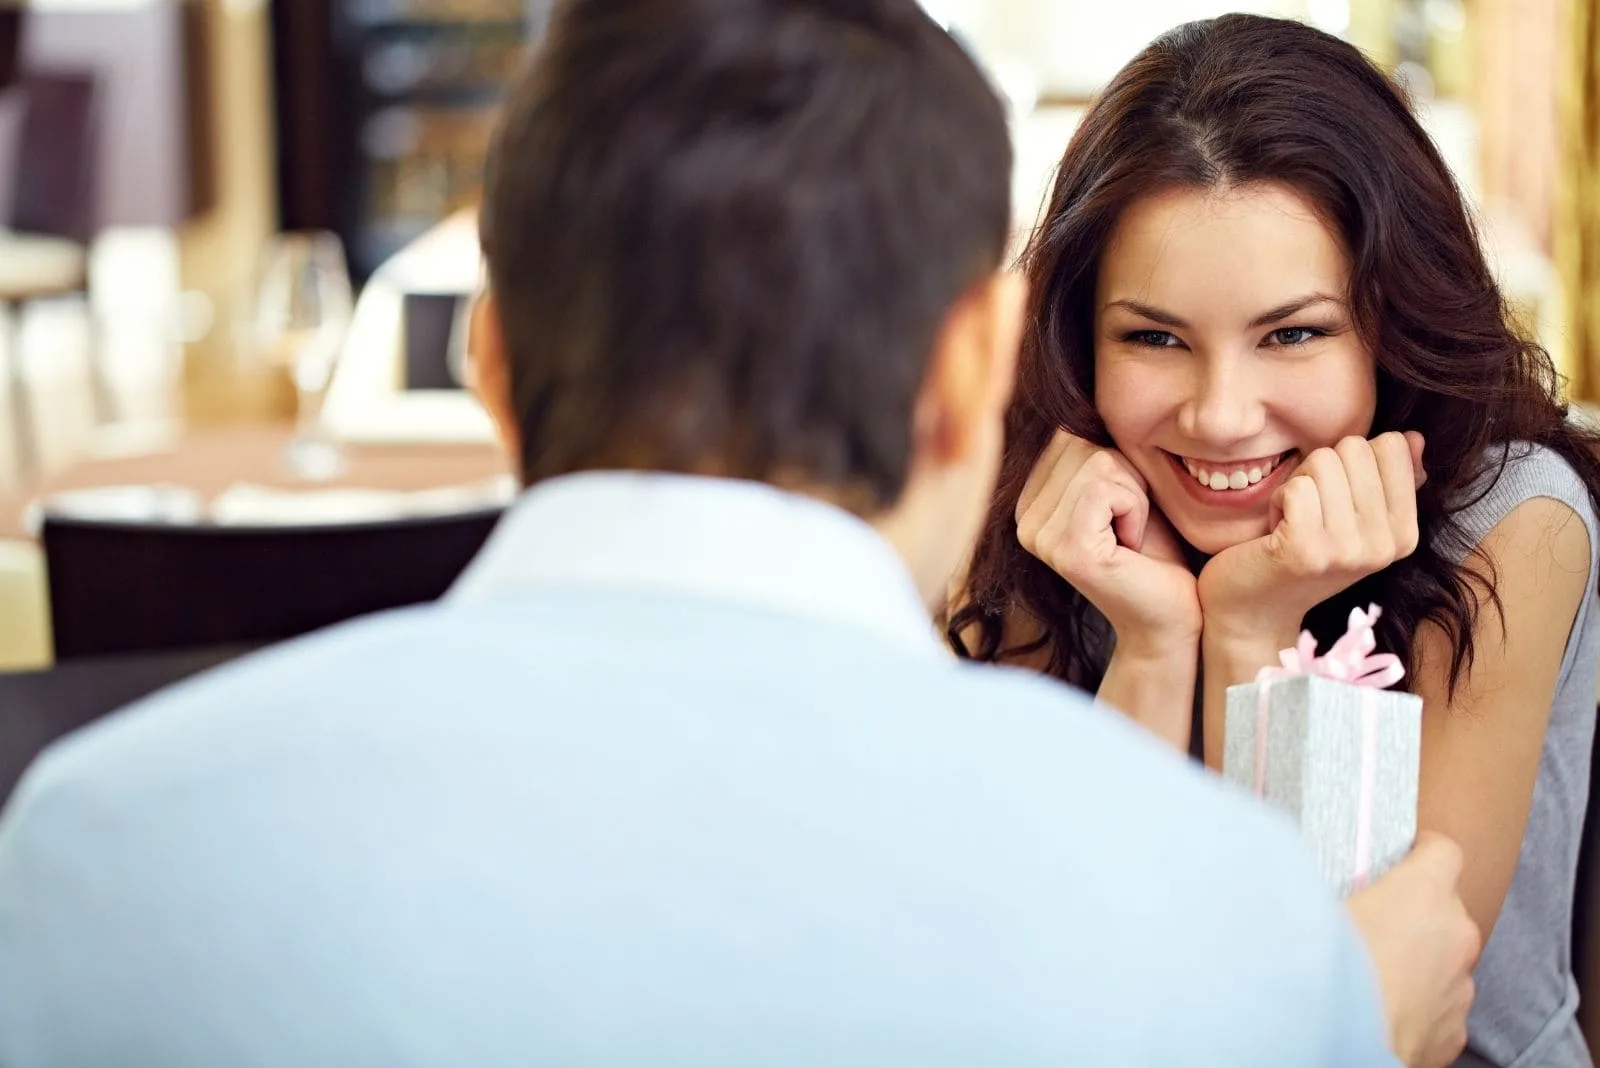 giggling beautiful woman over the gift of the man while having dinner